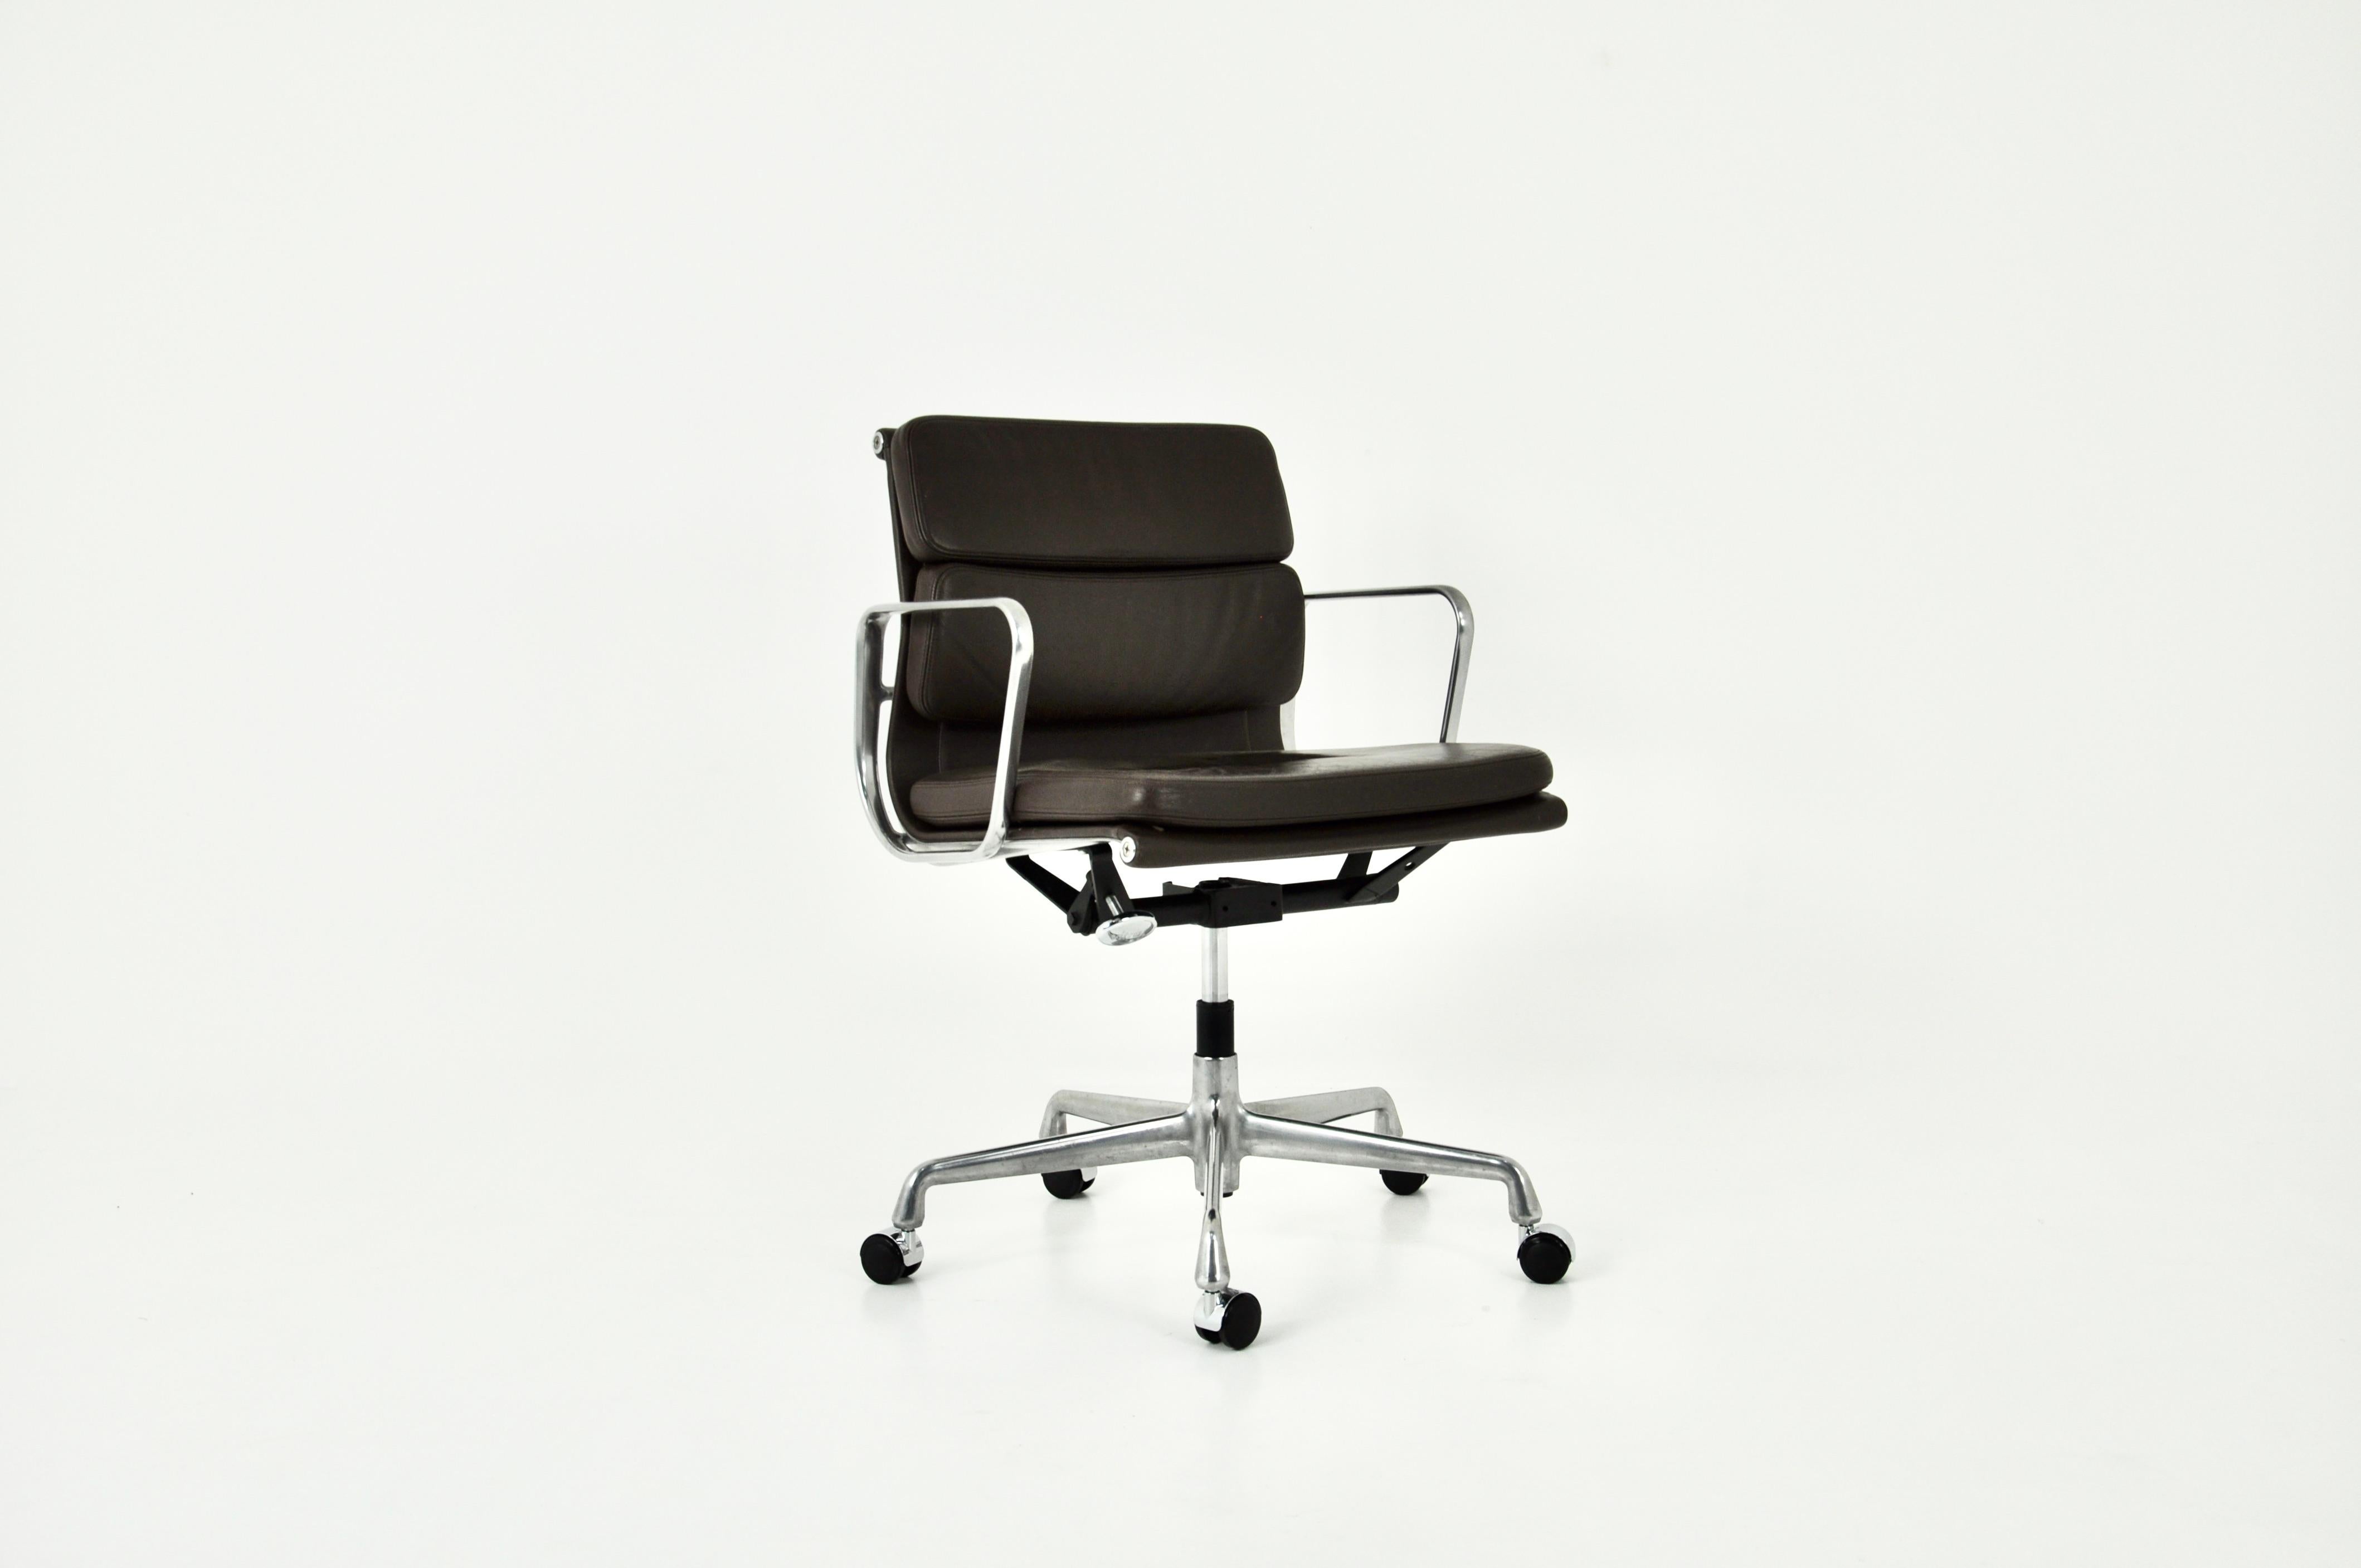 Brown leather desk chair with aluminum base. Seat height: 53cm. Stamped Vitra. Wear due to time and age of the chairs.